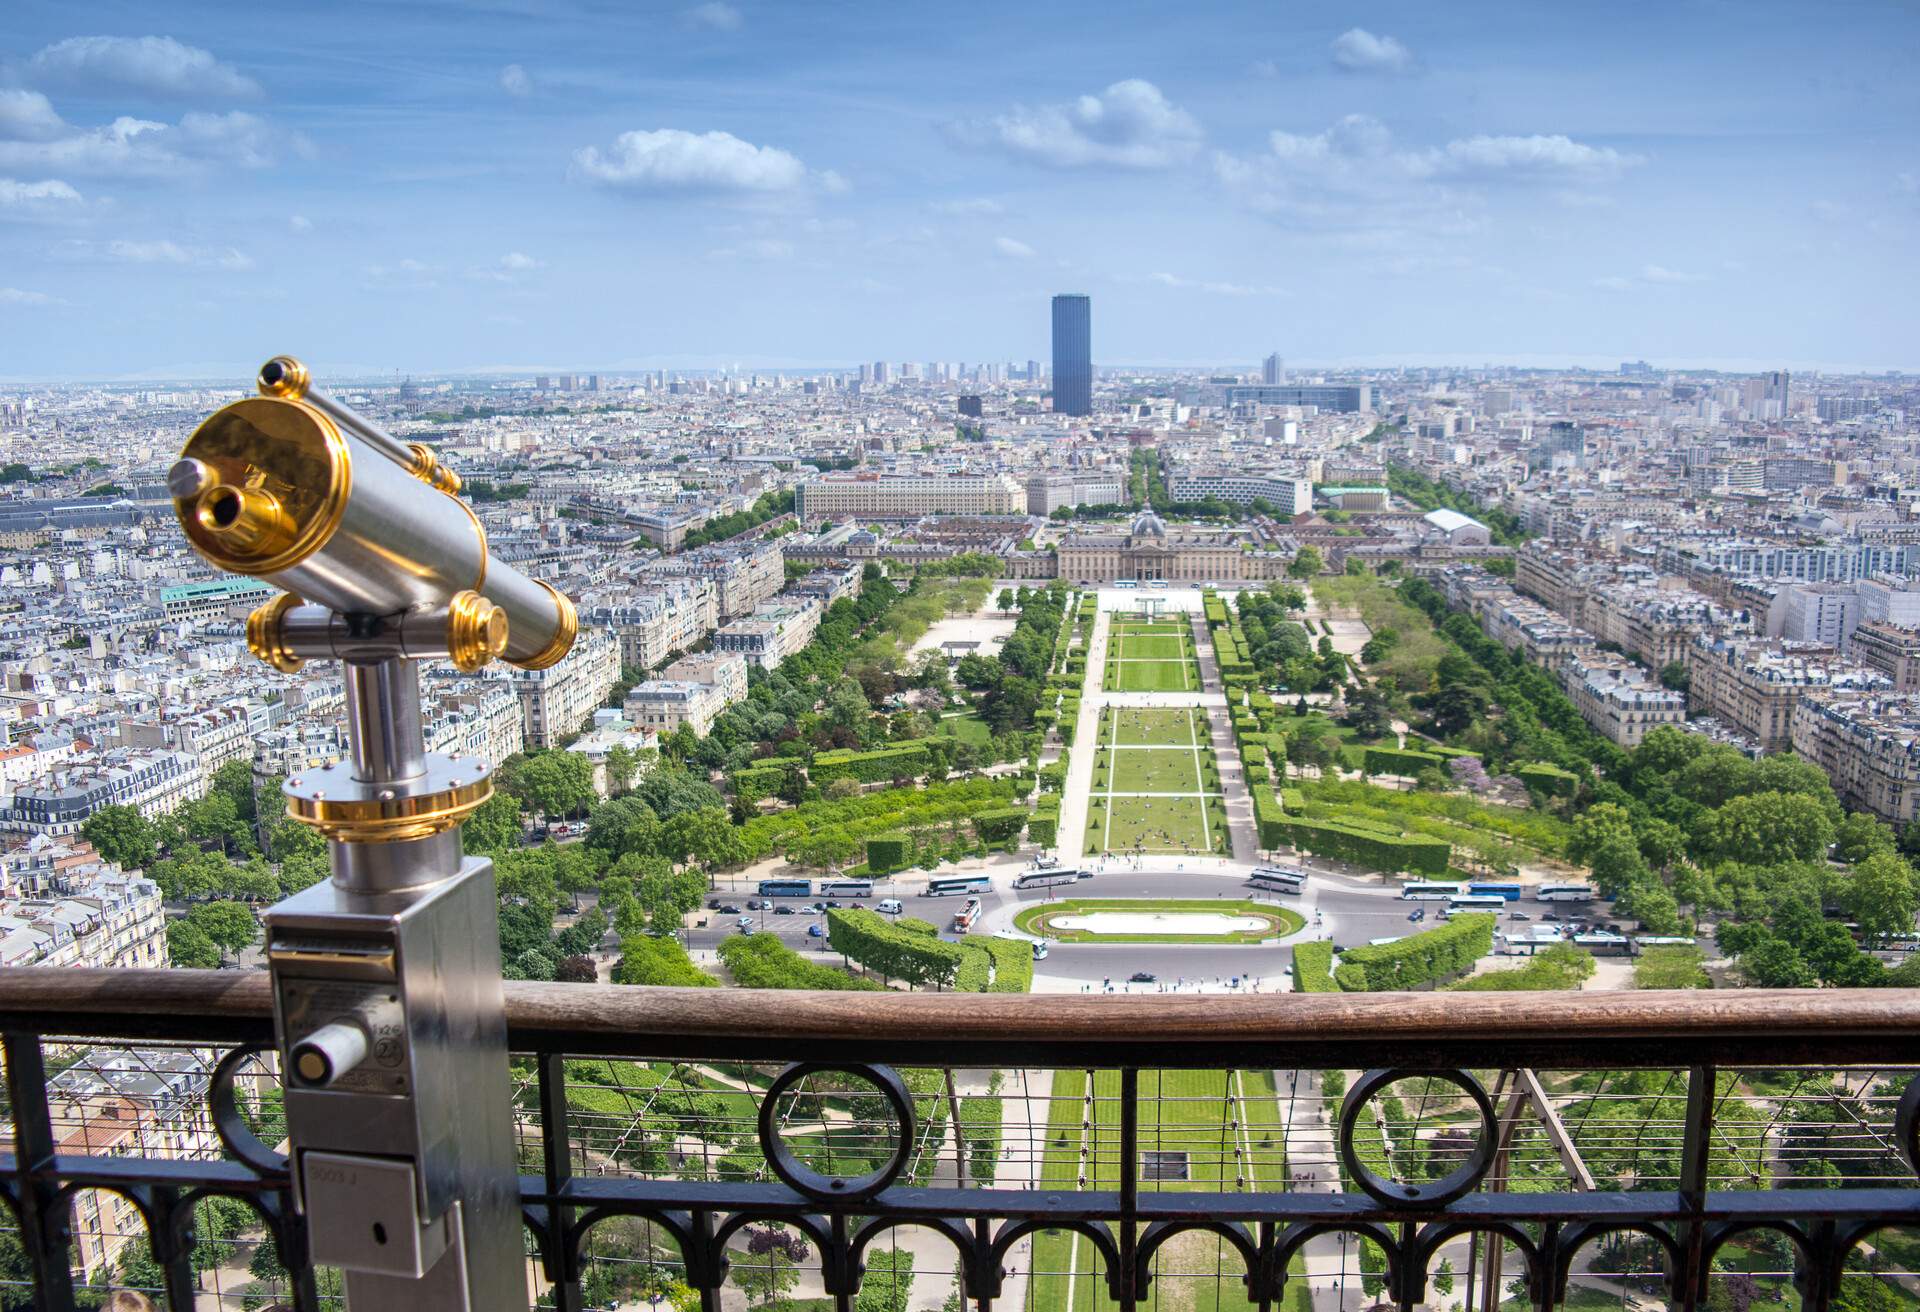 The Eiffel Tower's viewing deck with a telescope and views of the Champ de Mars, Paris, France